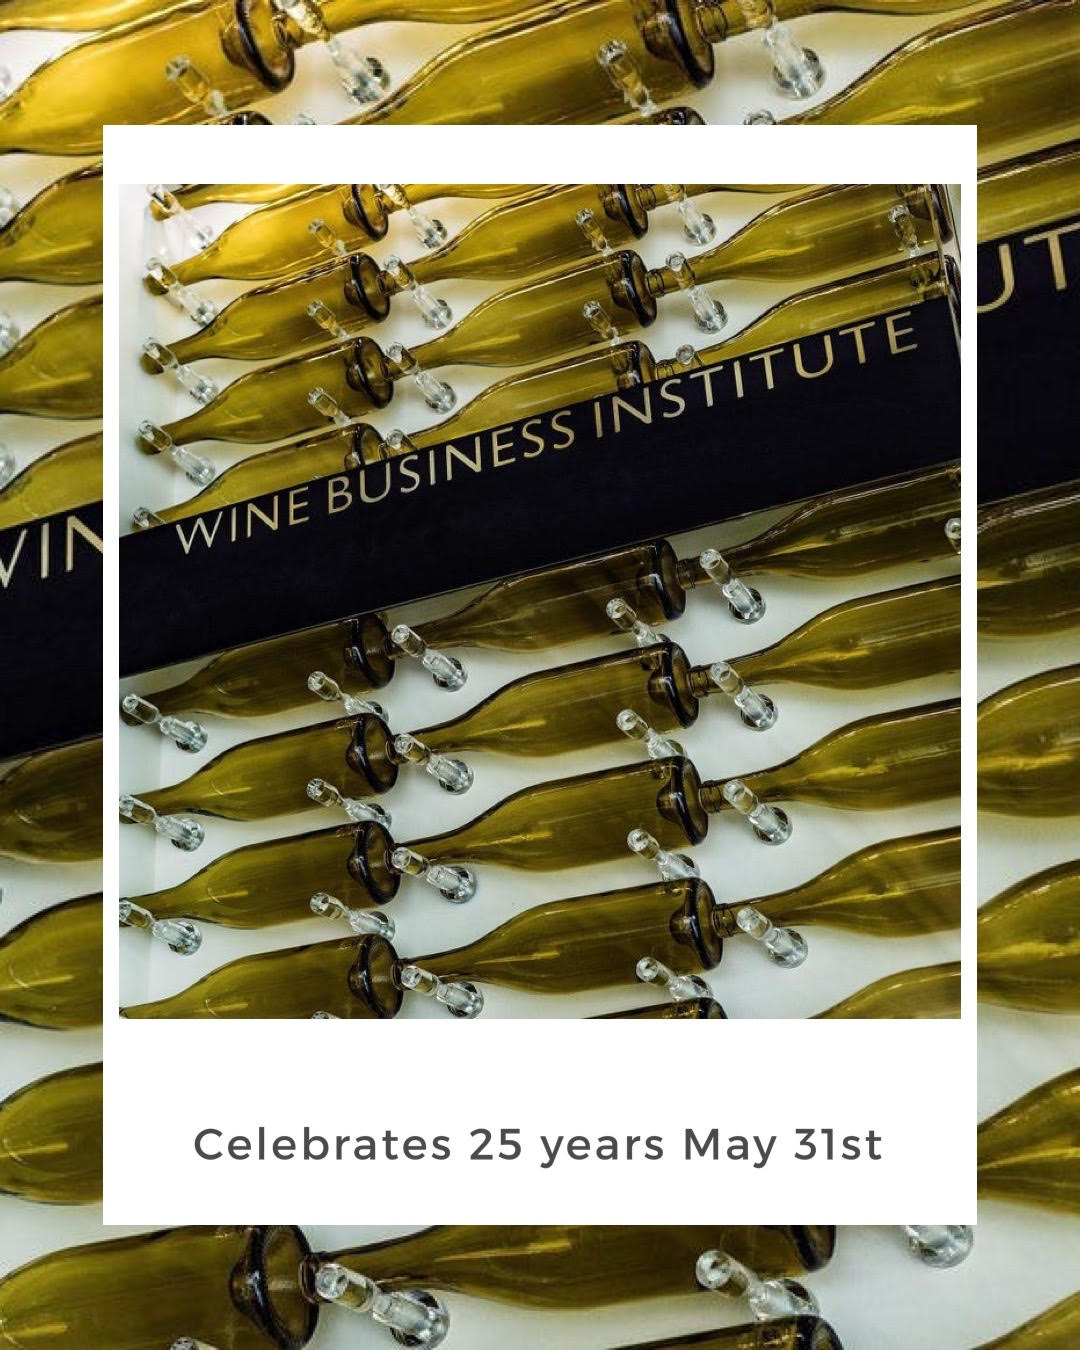 The Wine Business Institute Celebrates 25 Years on May 31st